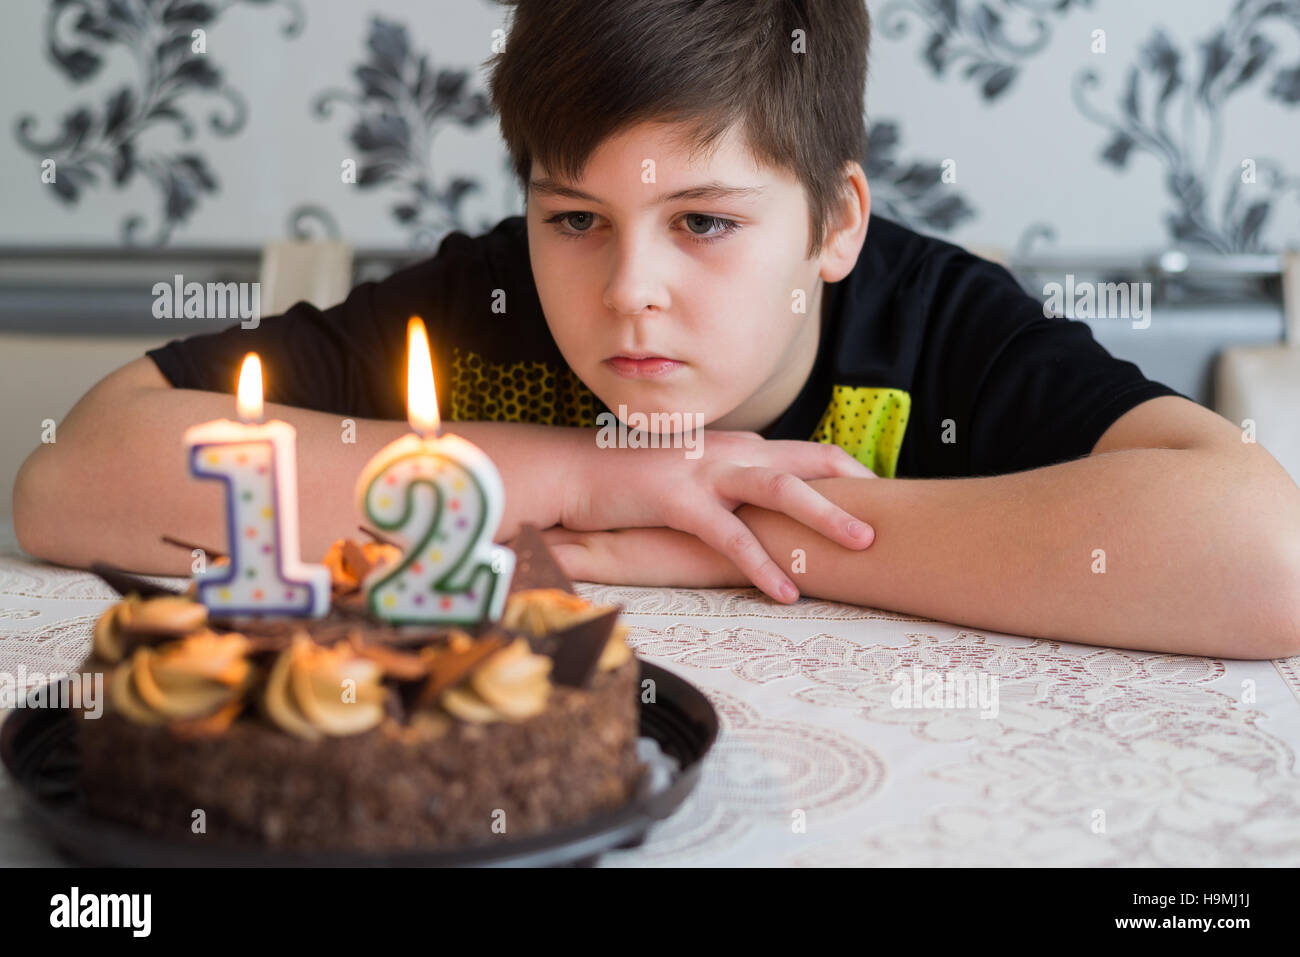 Teen boy looks thoughtfully at cake with candles on twelfth day of birth Stock Photo